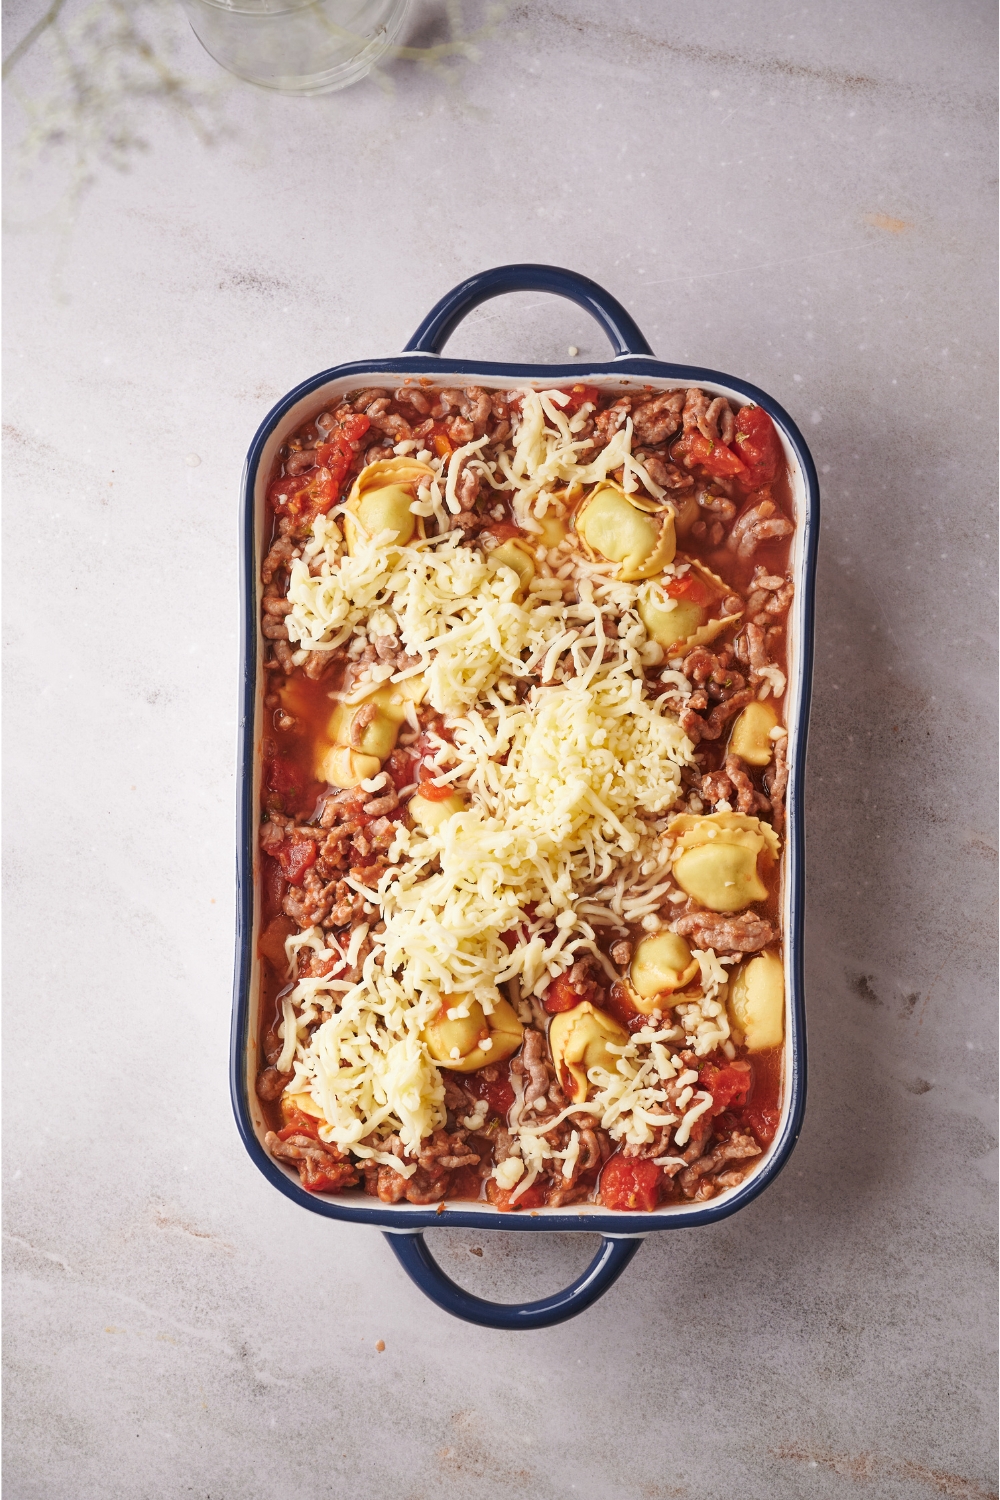 A baking dish filled with cooked ground beef, tomato sauce, tortellini pasta, and shredded cheese on top.